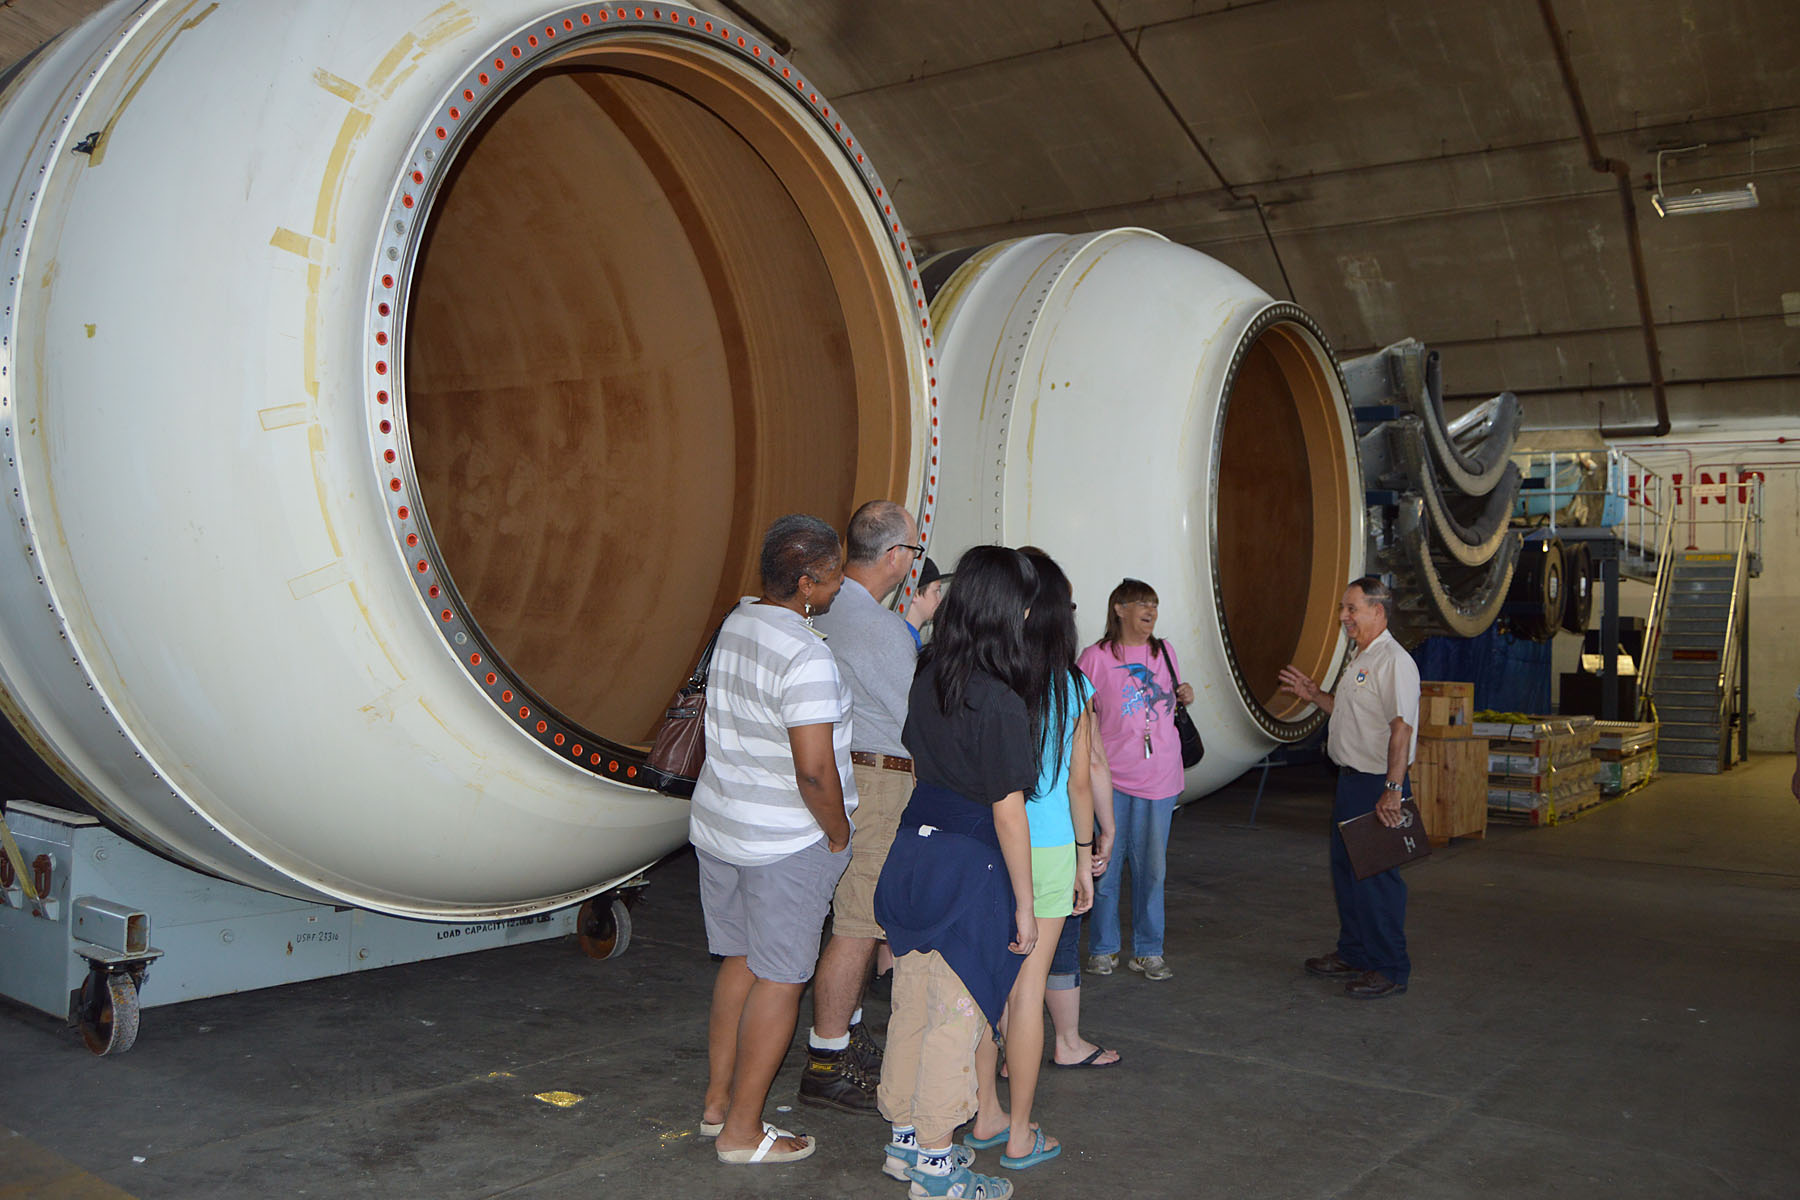 Visitors are able to see the Titan 4B during the Behind the Scenes Tours of the National Museum of the U.S. Air Force restoration hangars. (U.S. Air Force photo by Ken LaRock)